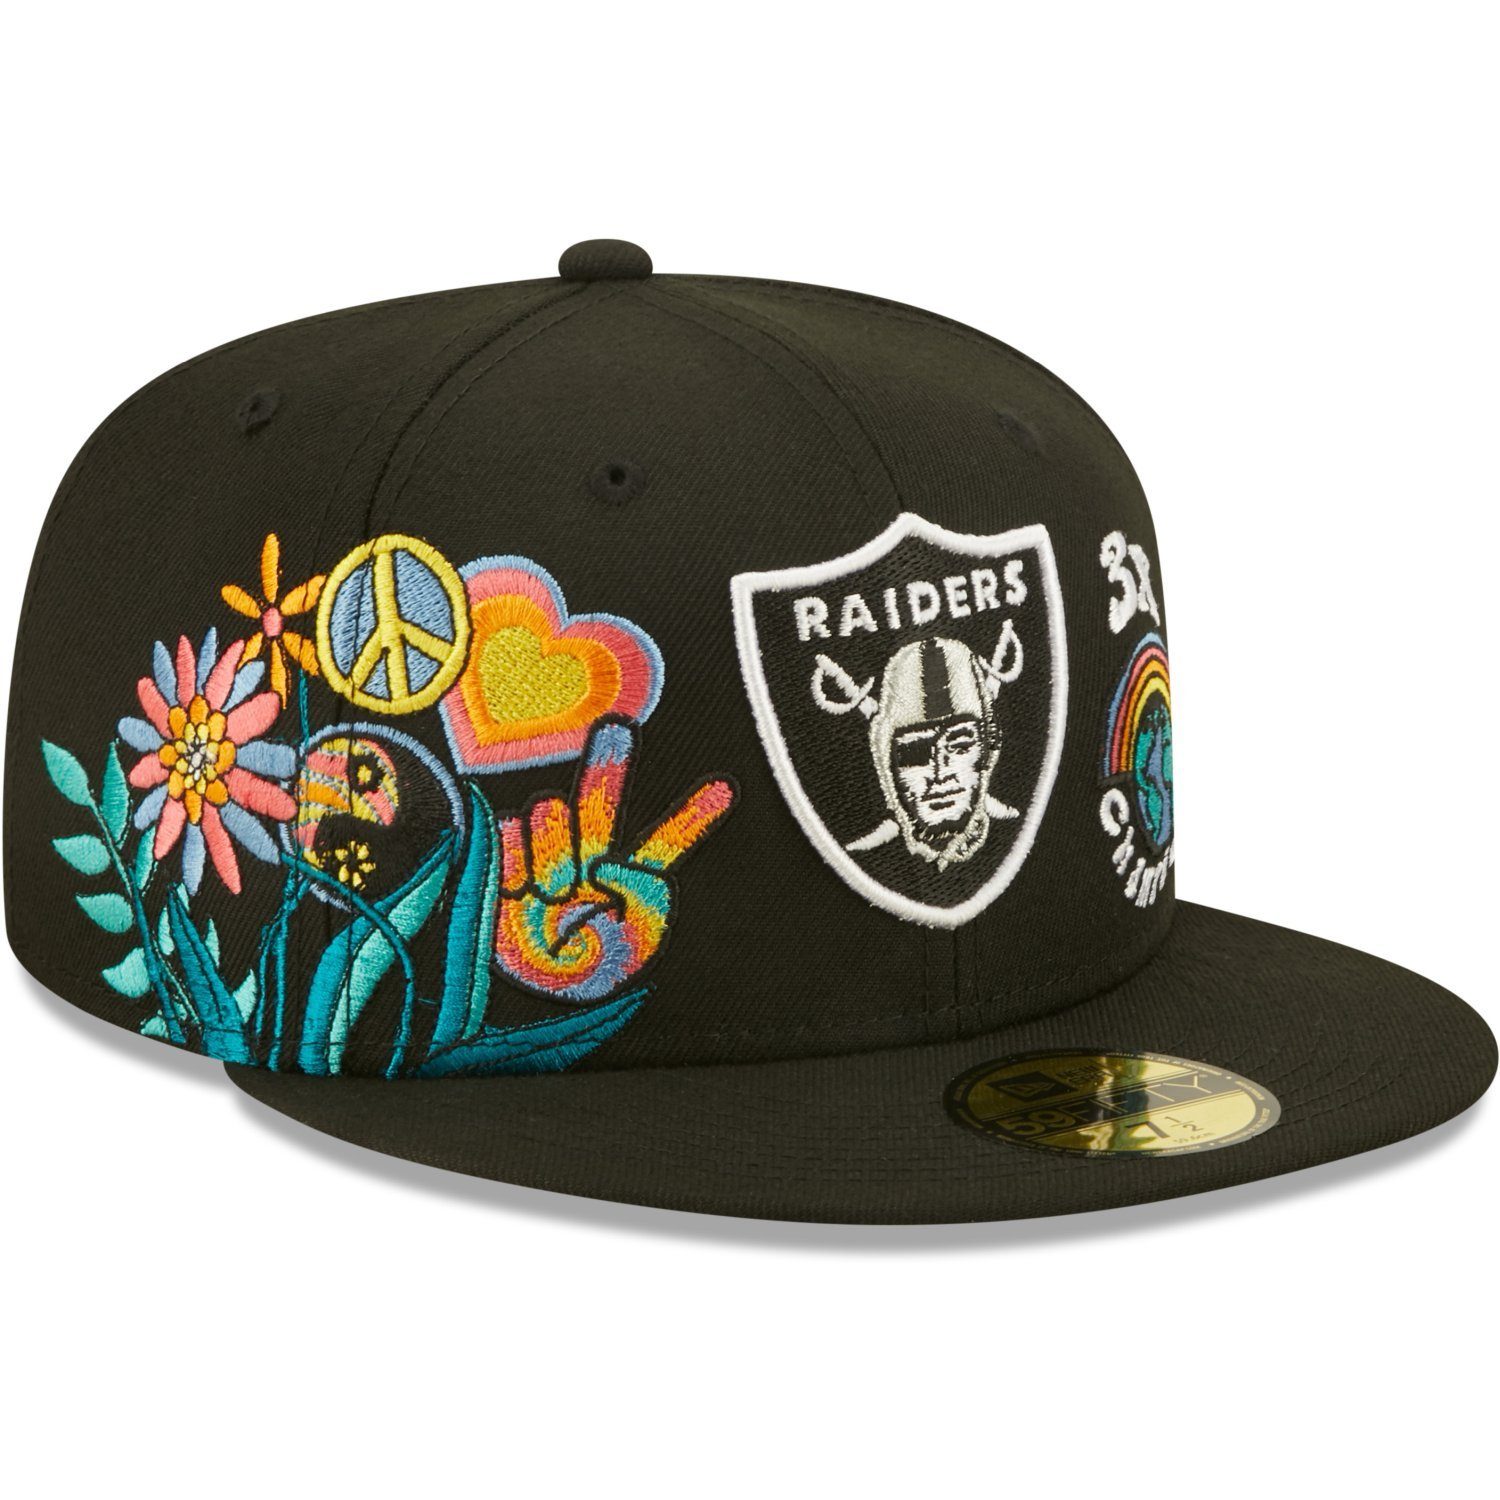 Las New Vegas Cap Era GROOVY Raiders Fitted 59Fifty